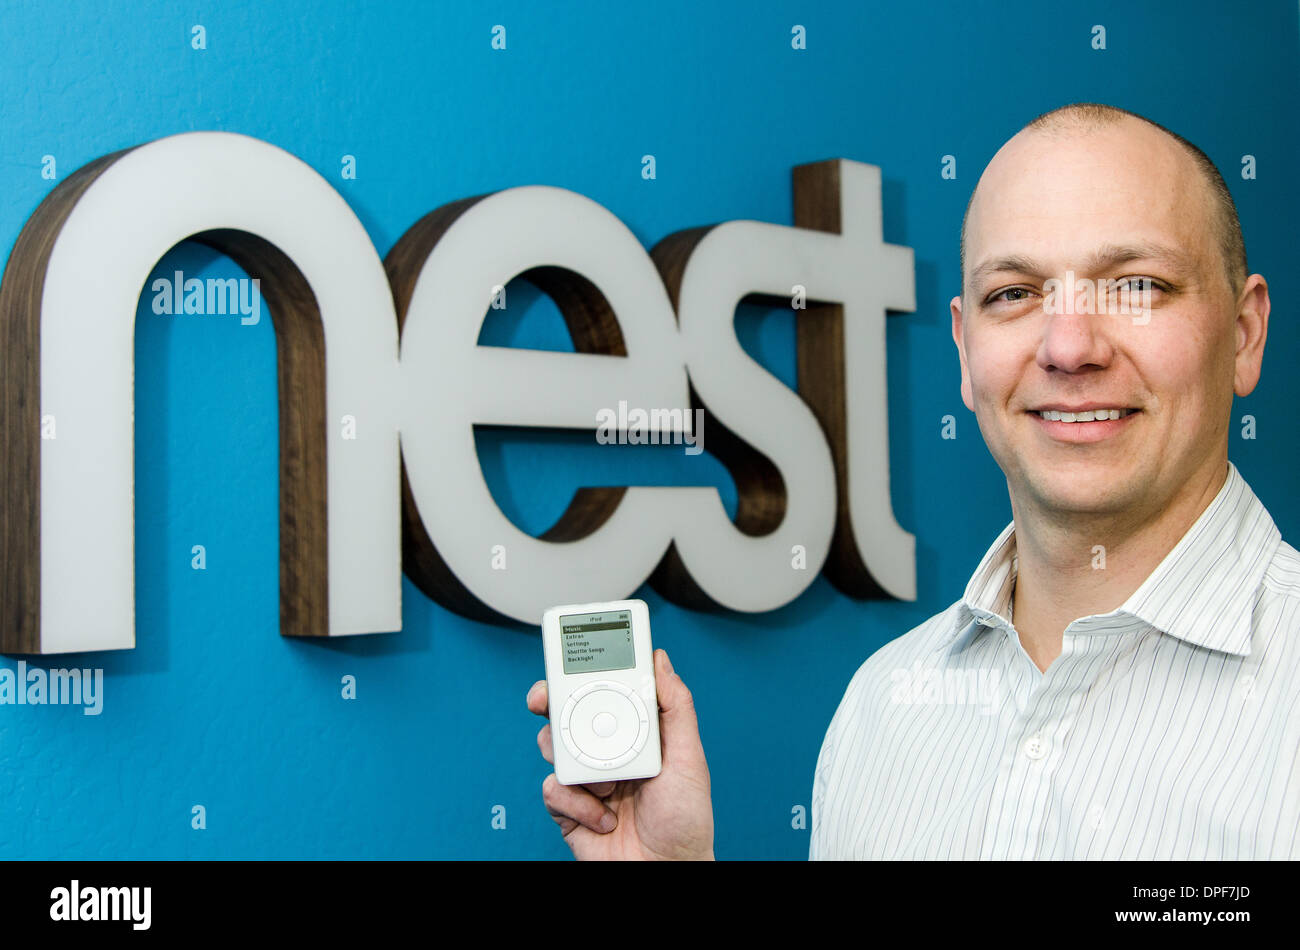 At Apple, Tony Fadell helped develop both iPod and iPhone. He co-founded smart appliance maker Nest, known for its successful thermostat, which was acquired by Google in January 2014. In an unusual photo , Fadell with the original iPod in 2012. Stock Photo